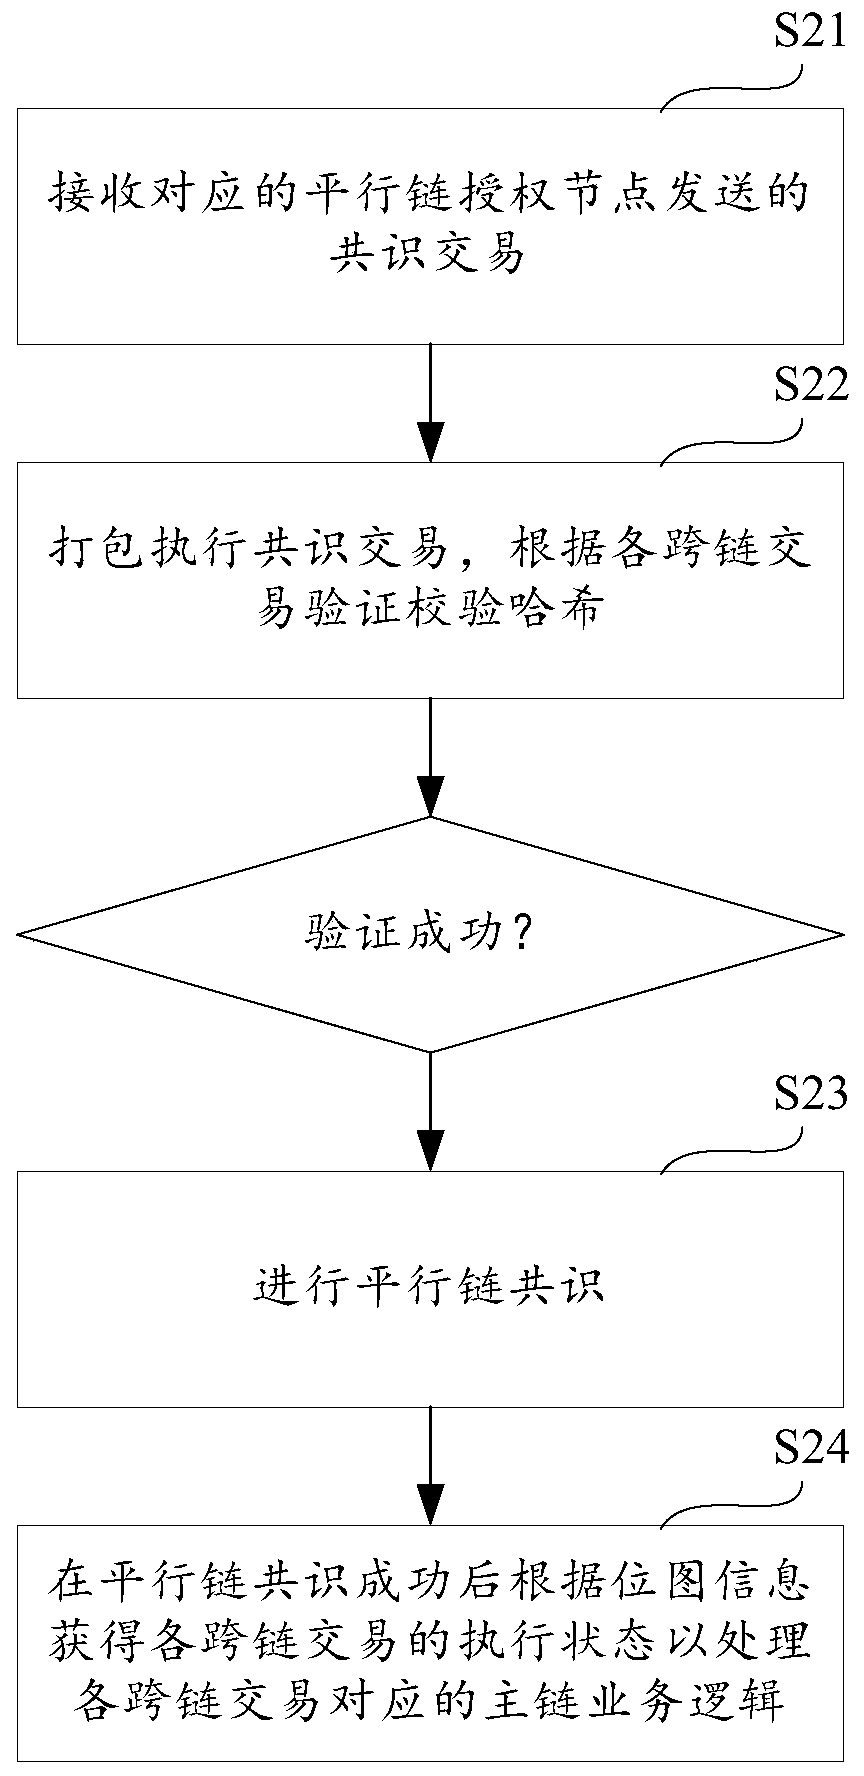 Parallel chain main chain transaction state synchronization method and device, and storage medium